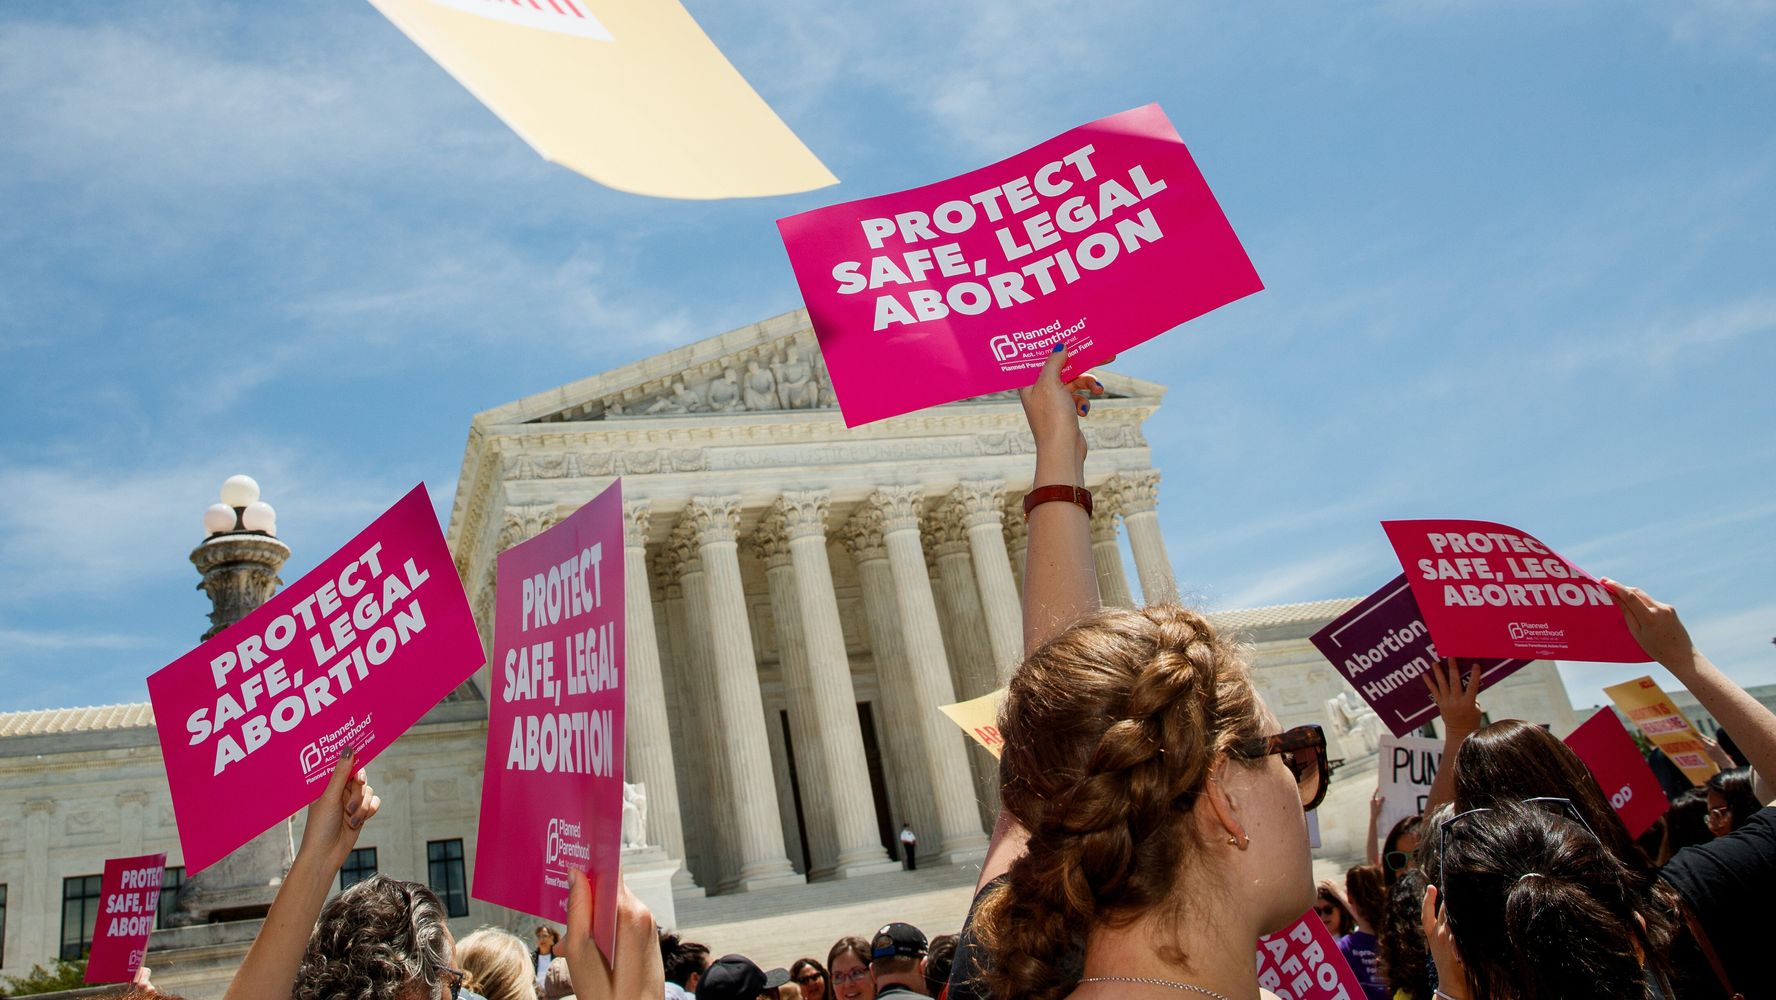 What You Need To Know About The Supreme Court's New Abortion Rights Case